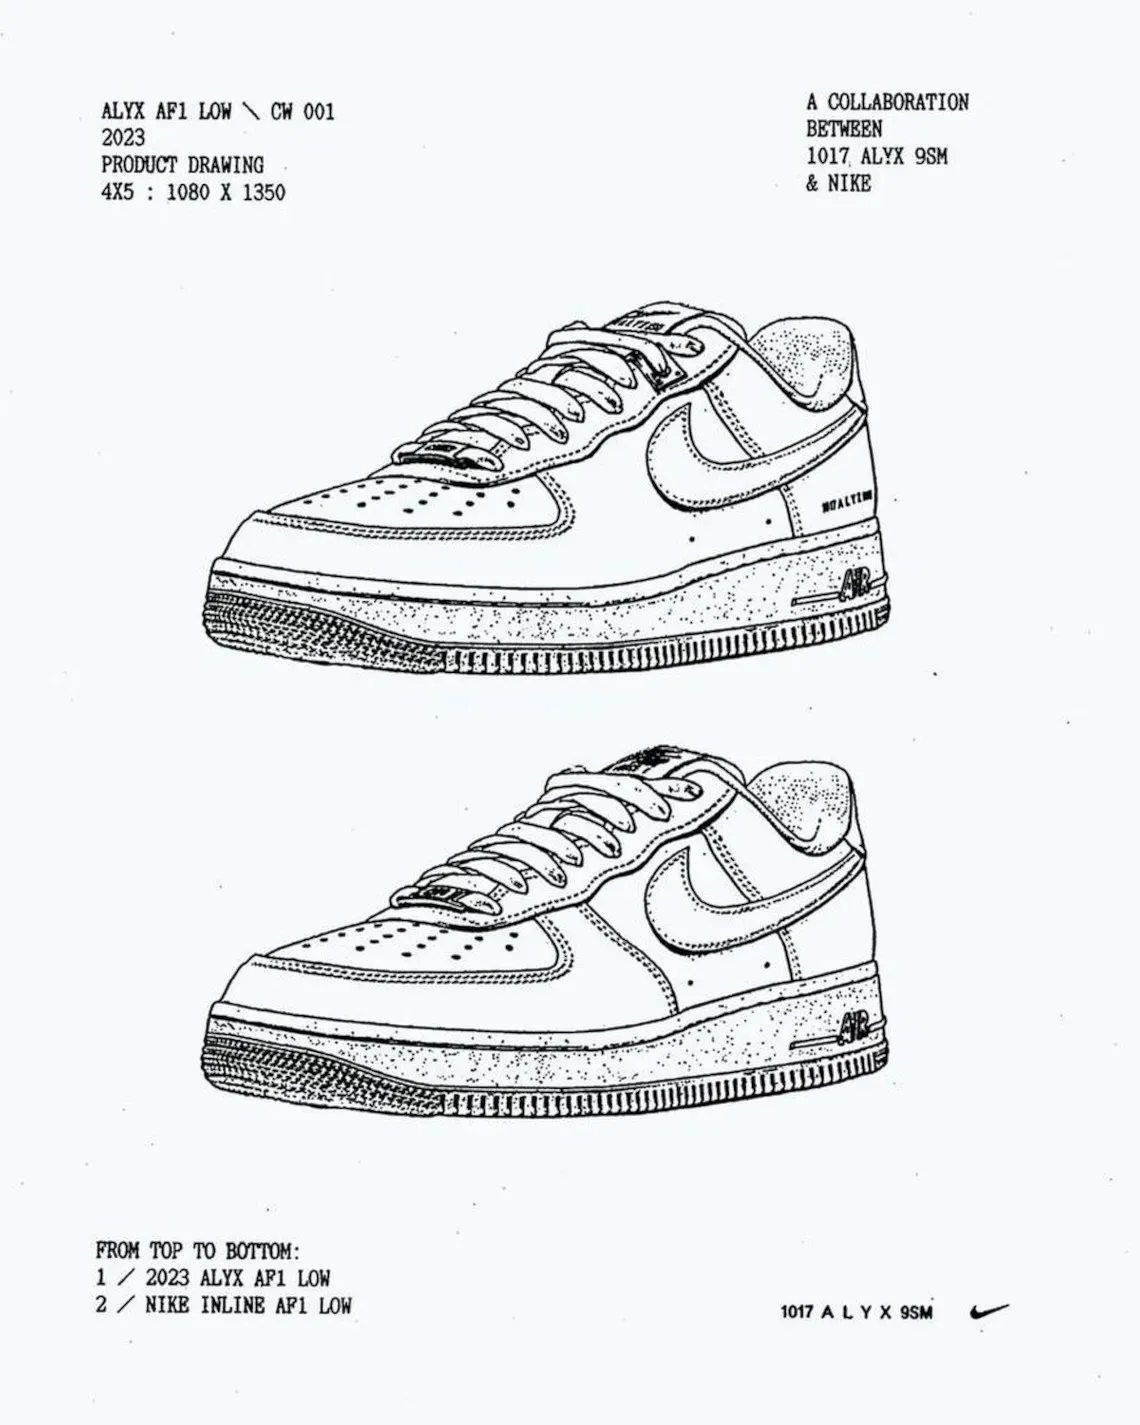 MMW Alyx Nike Air Force 1 Low Pack Release Info